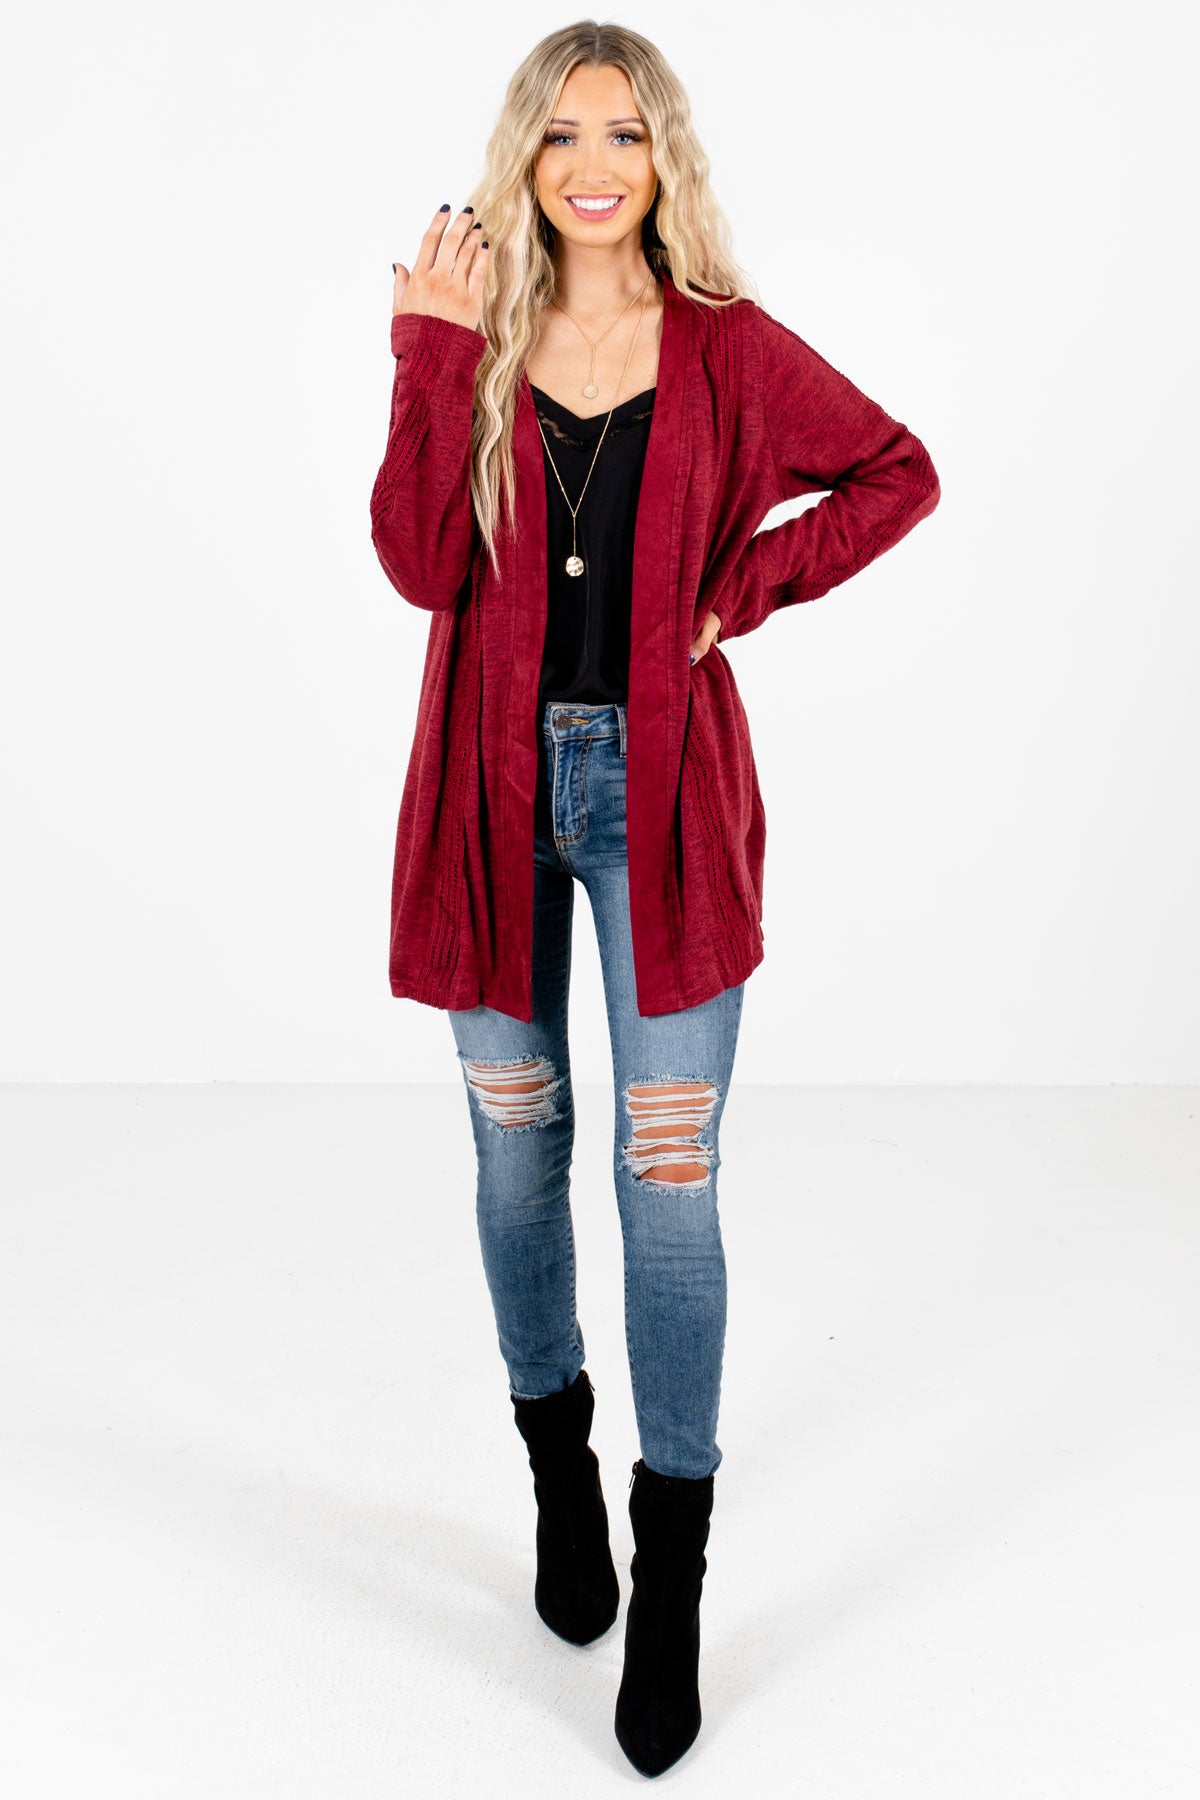 Women’s Burgundy Fall and Winter Boutique Clothing